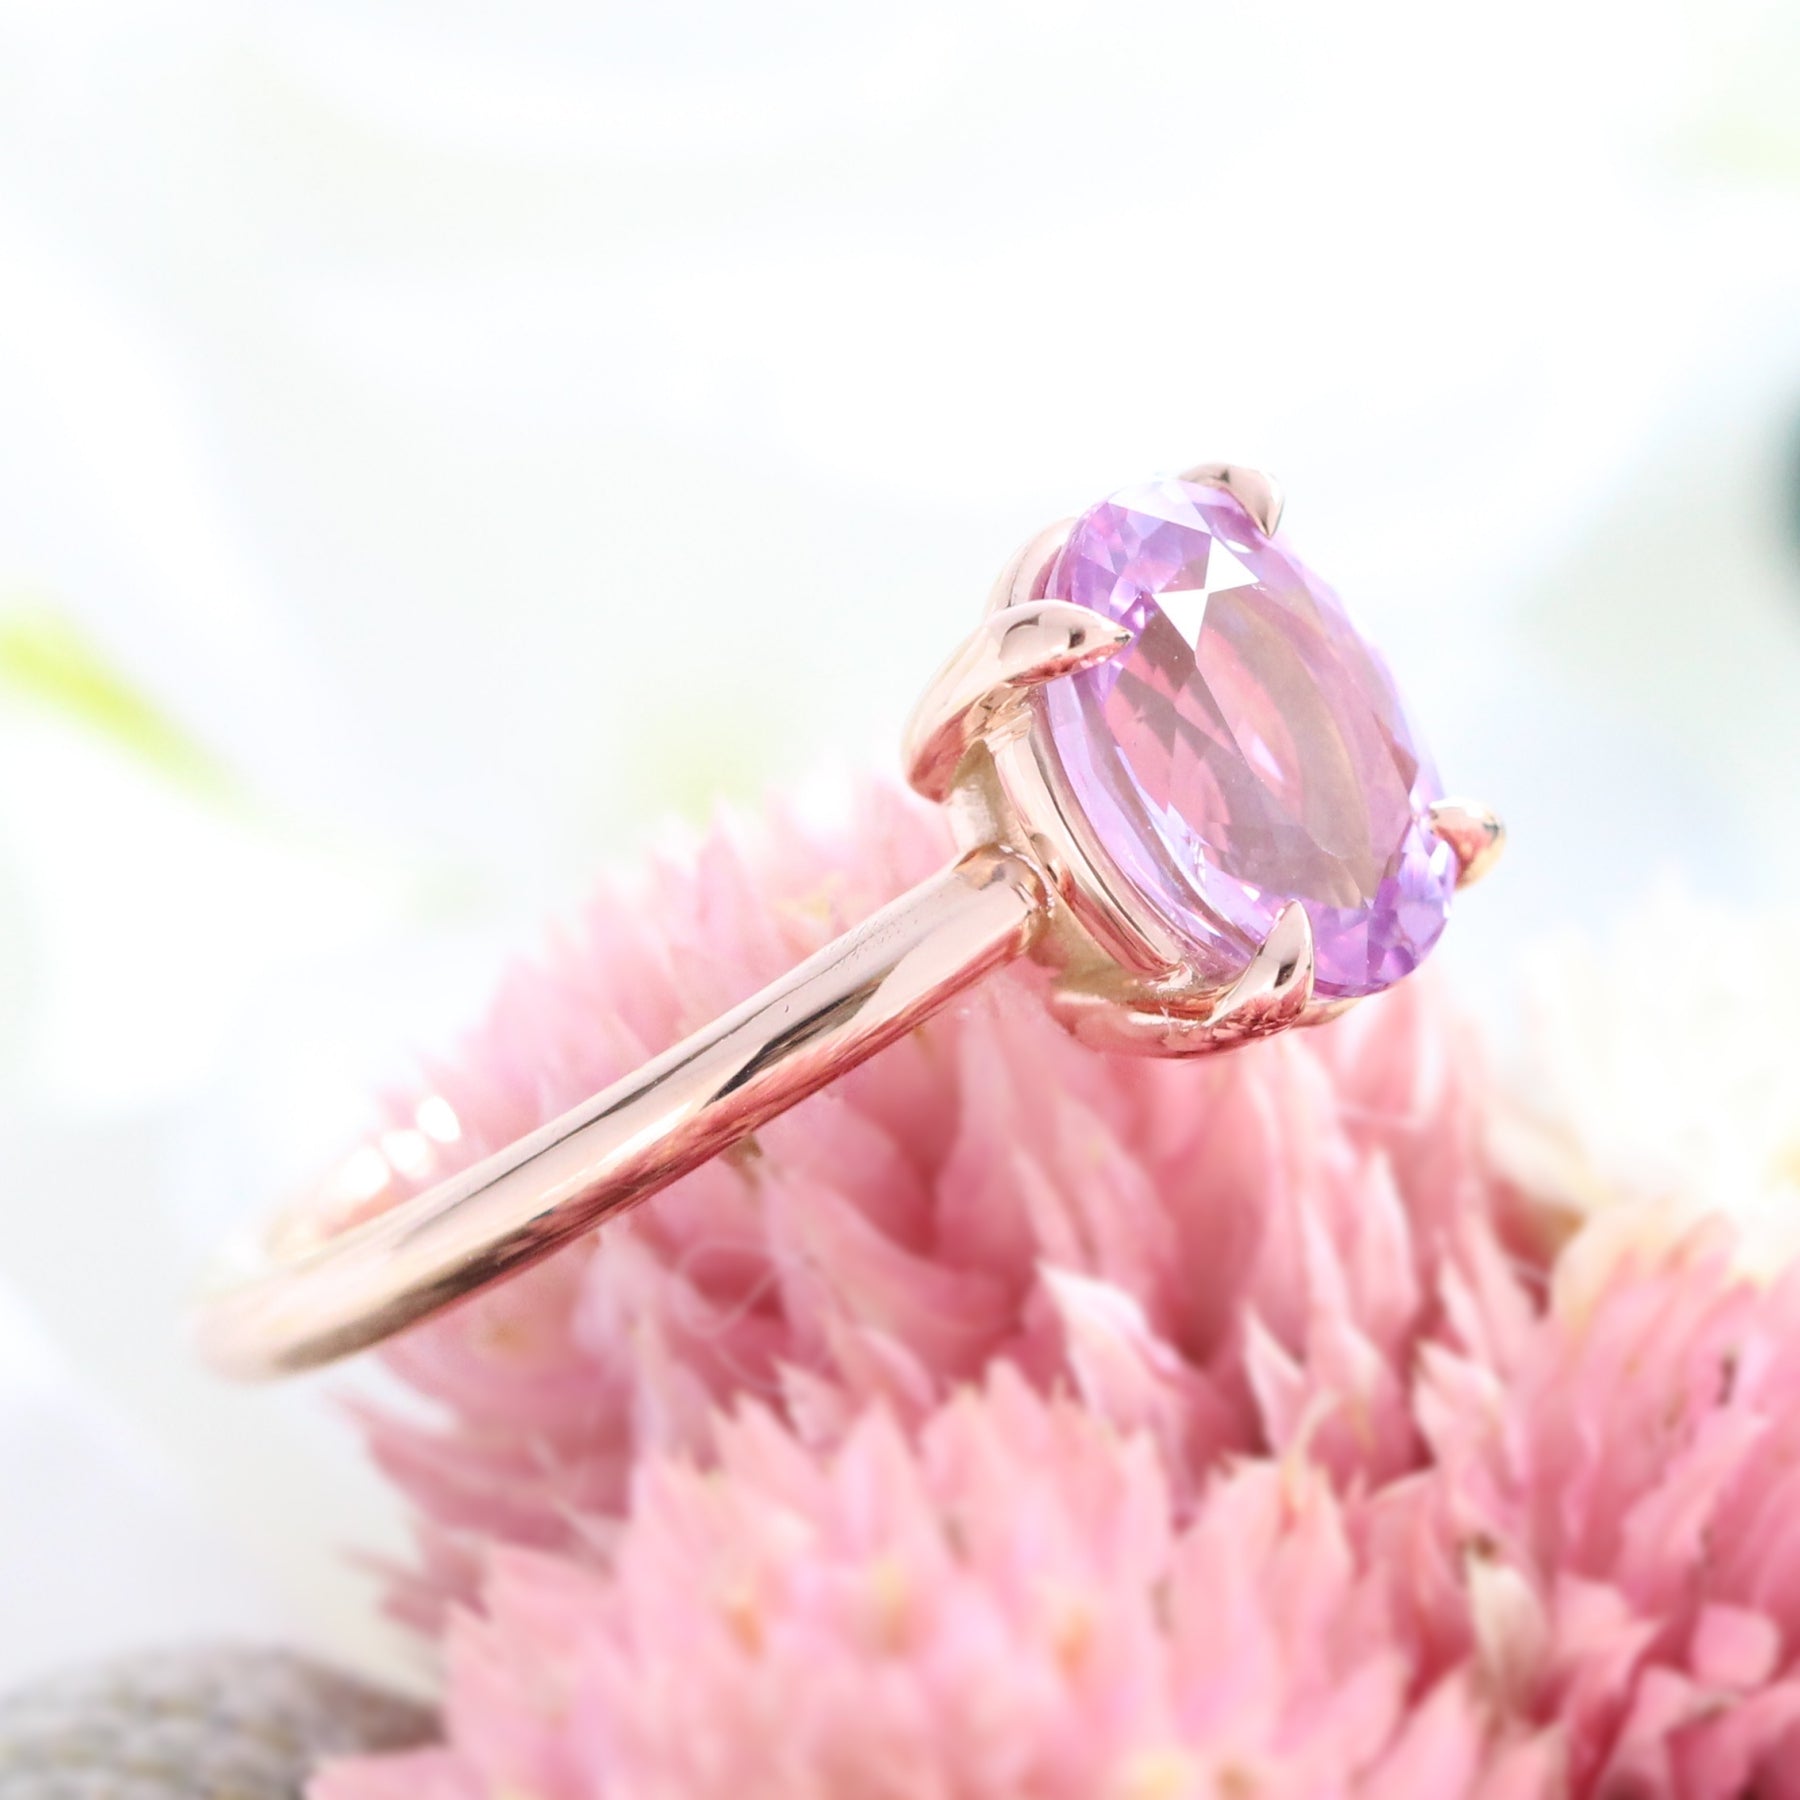 Lavender purple sapphire engagement ring rose gold low profile solitaire ring la more design jewelry